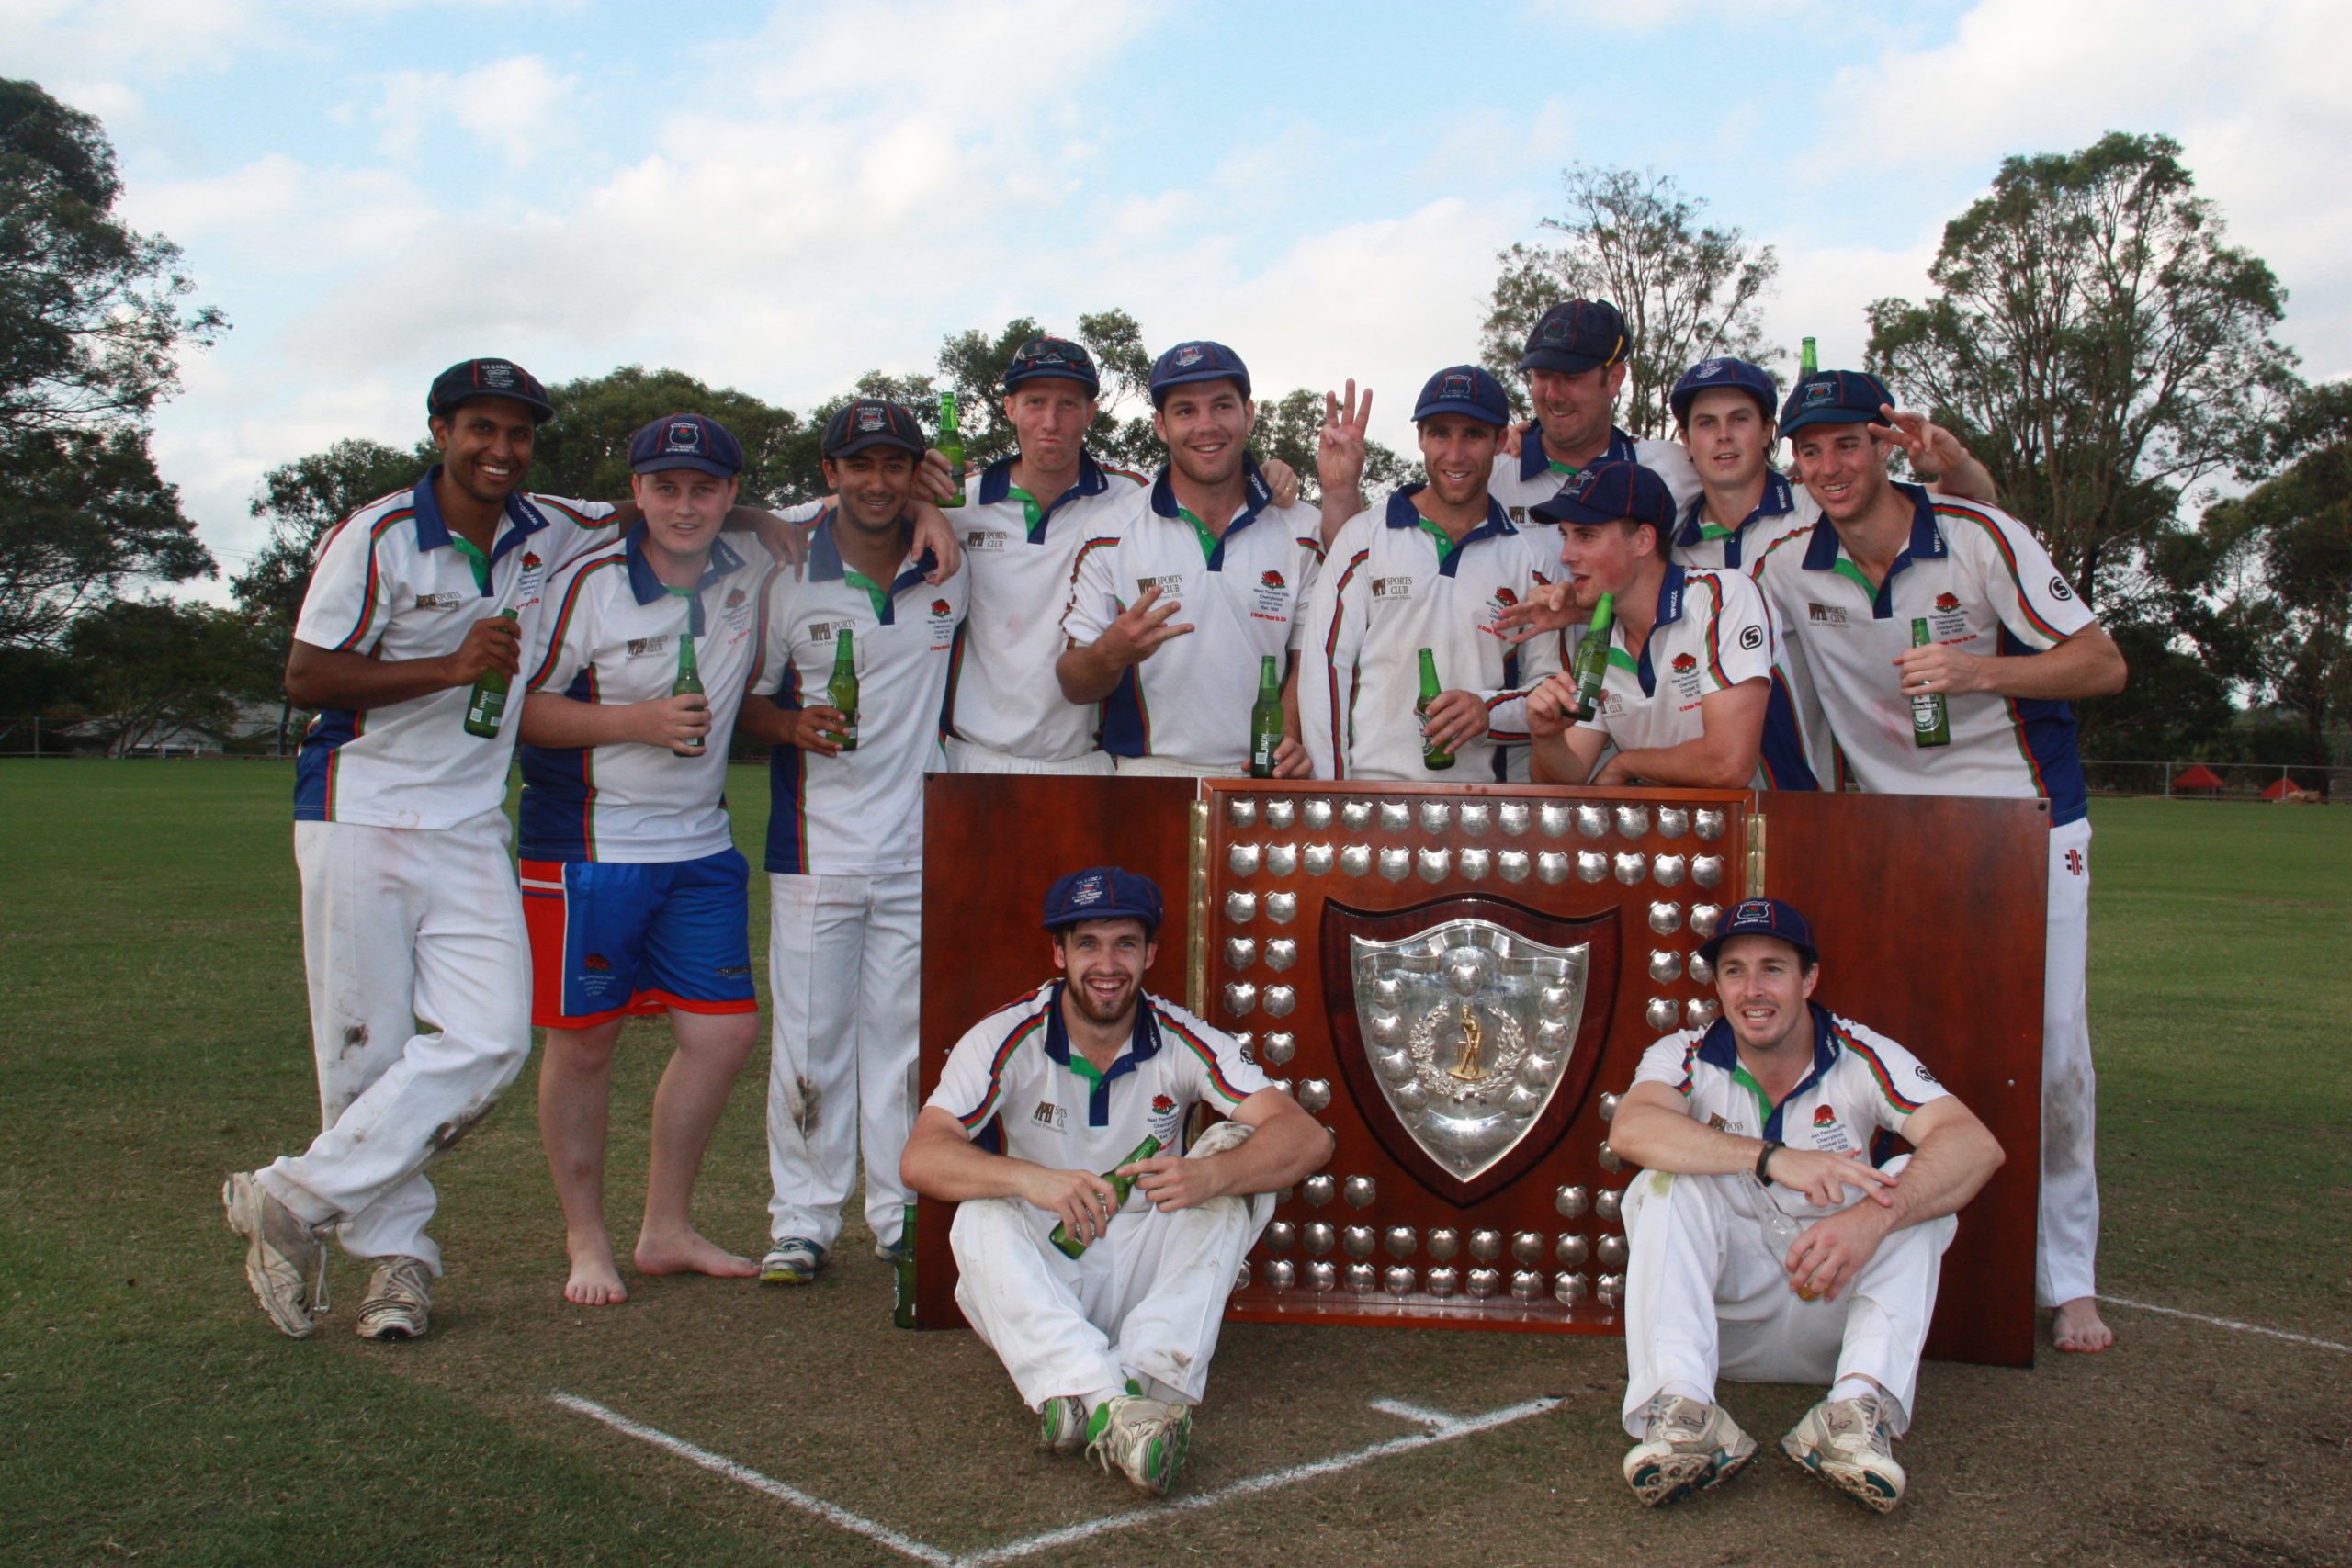 A1 Grand Final (Rofie 3) Vs ARL - Parklands Oval 39 and 30 March 2014